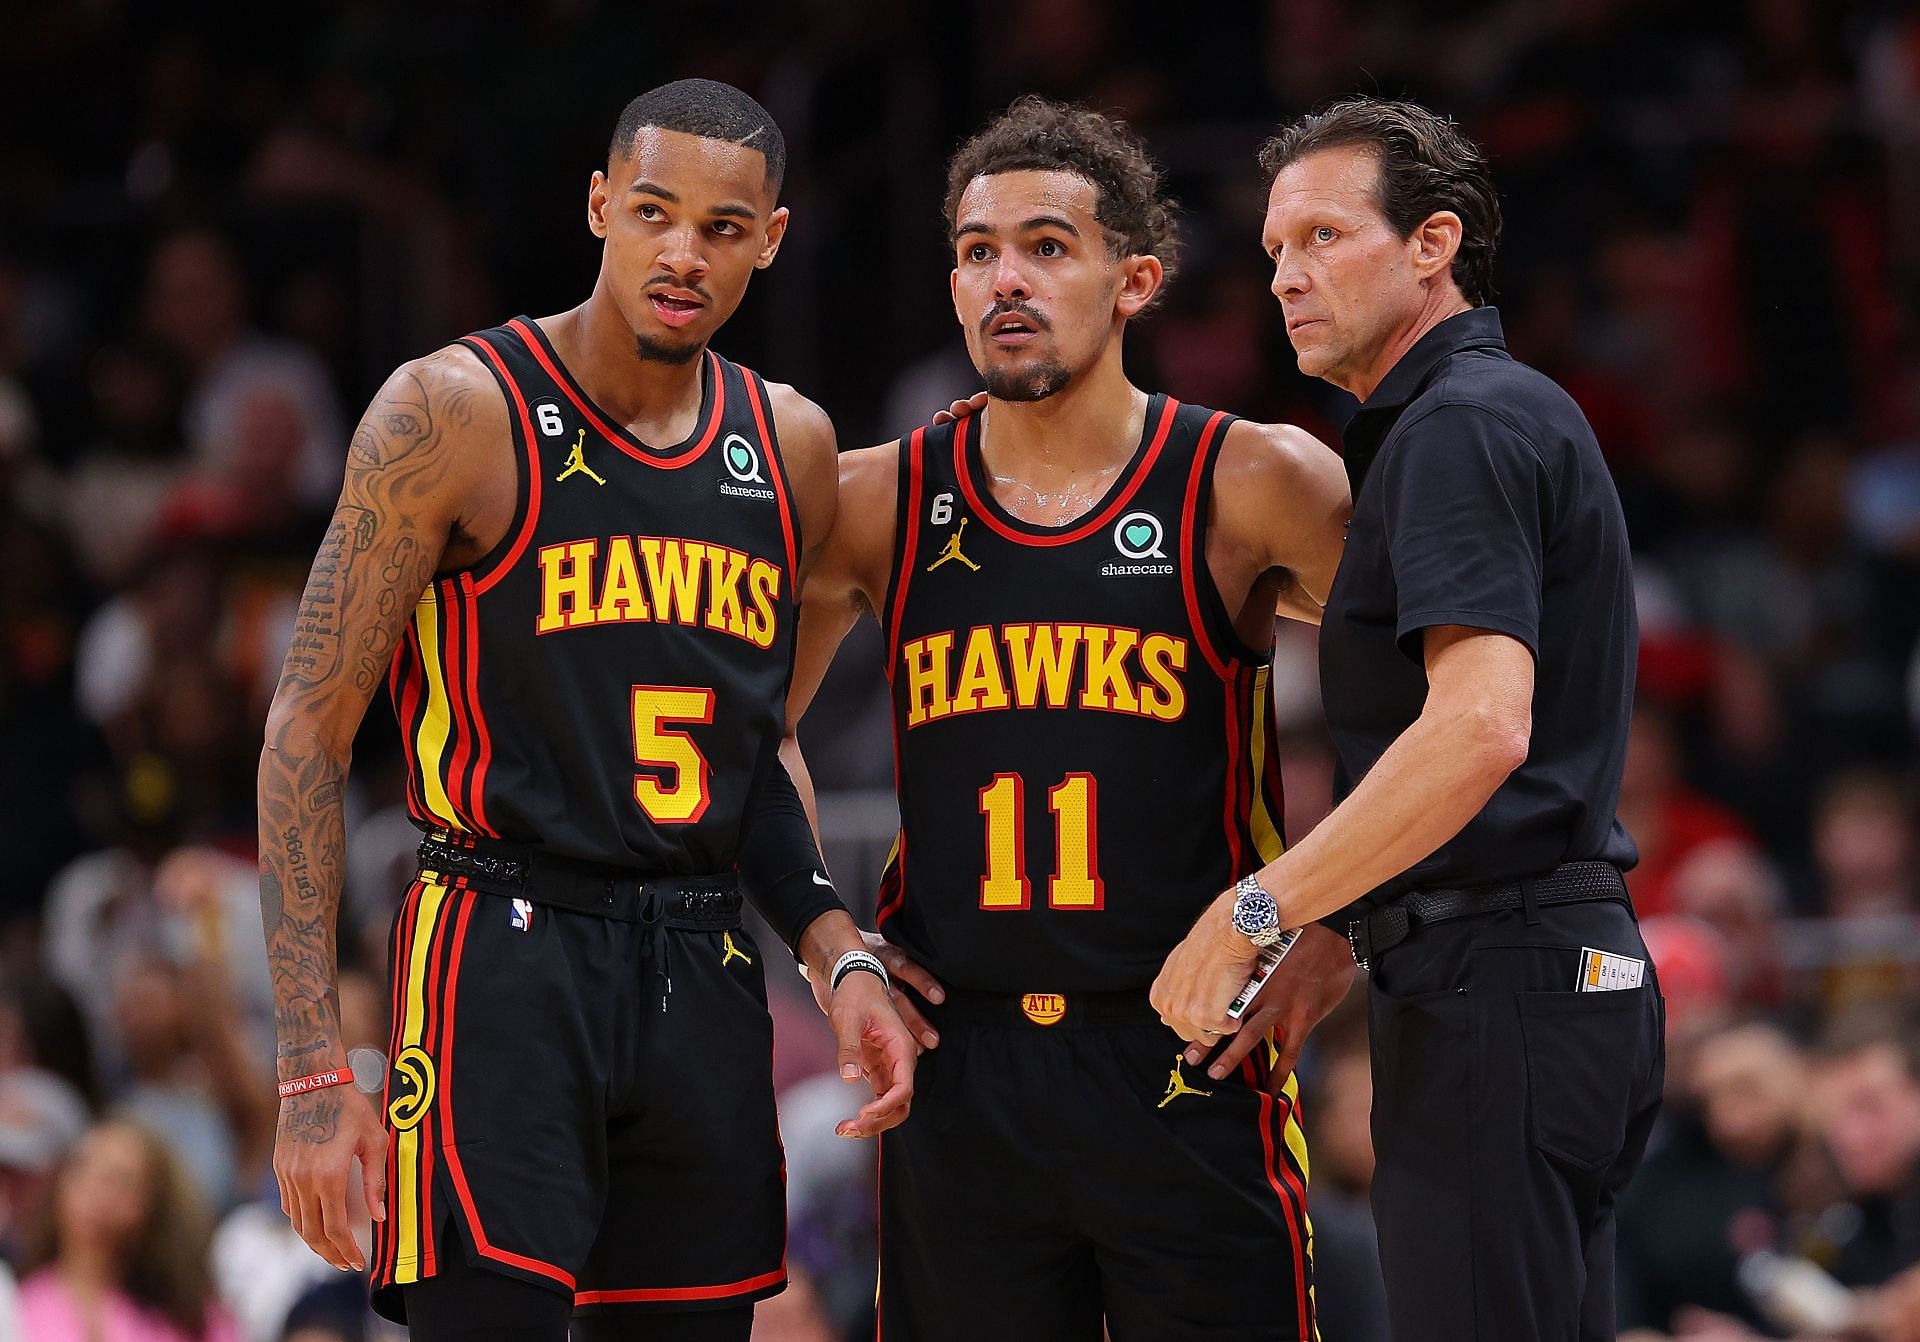 The Hawks backcourt duo combined for 57 points in Game 3 (Image via Getty Images)